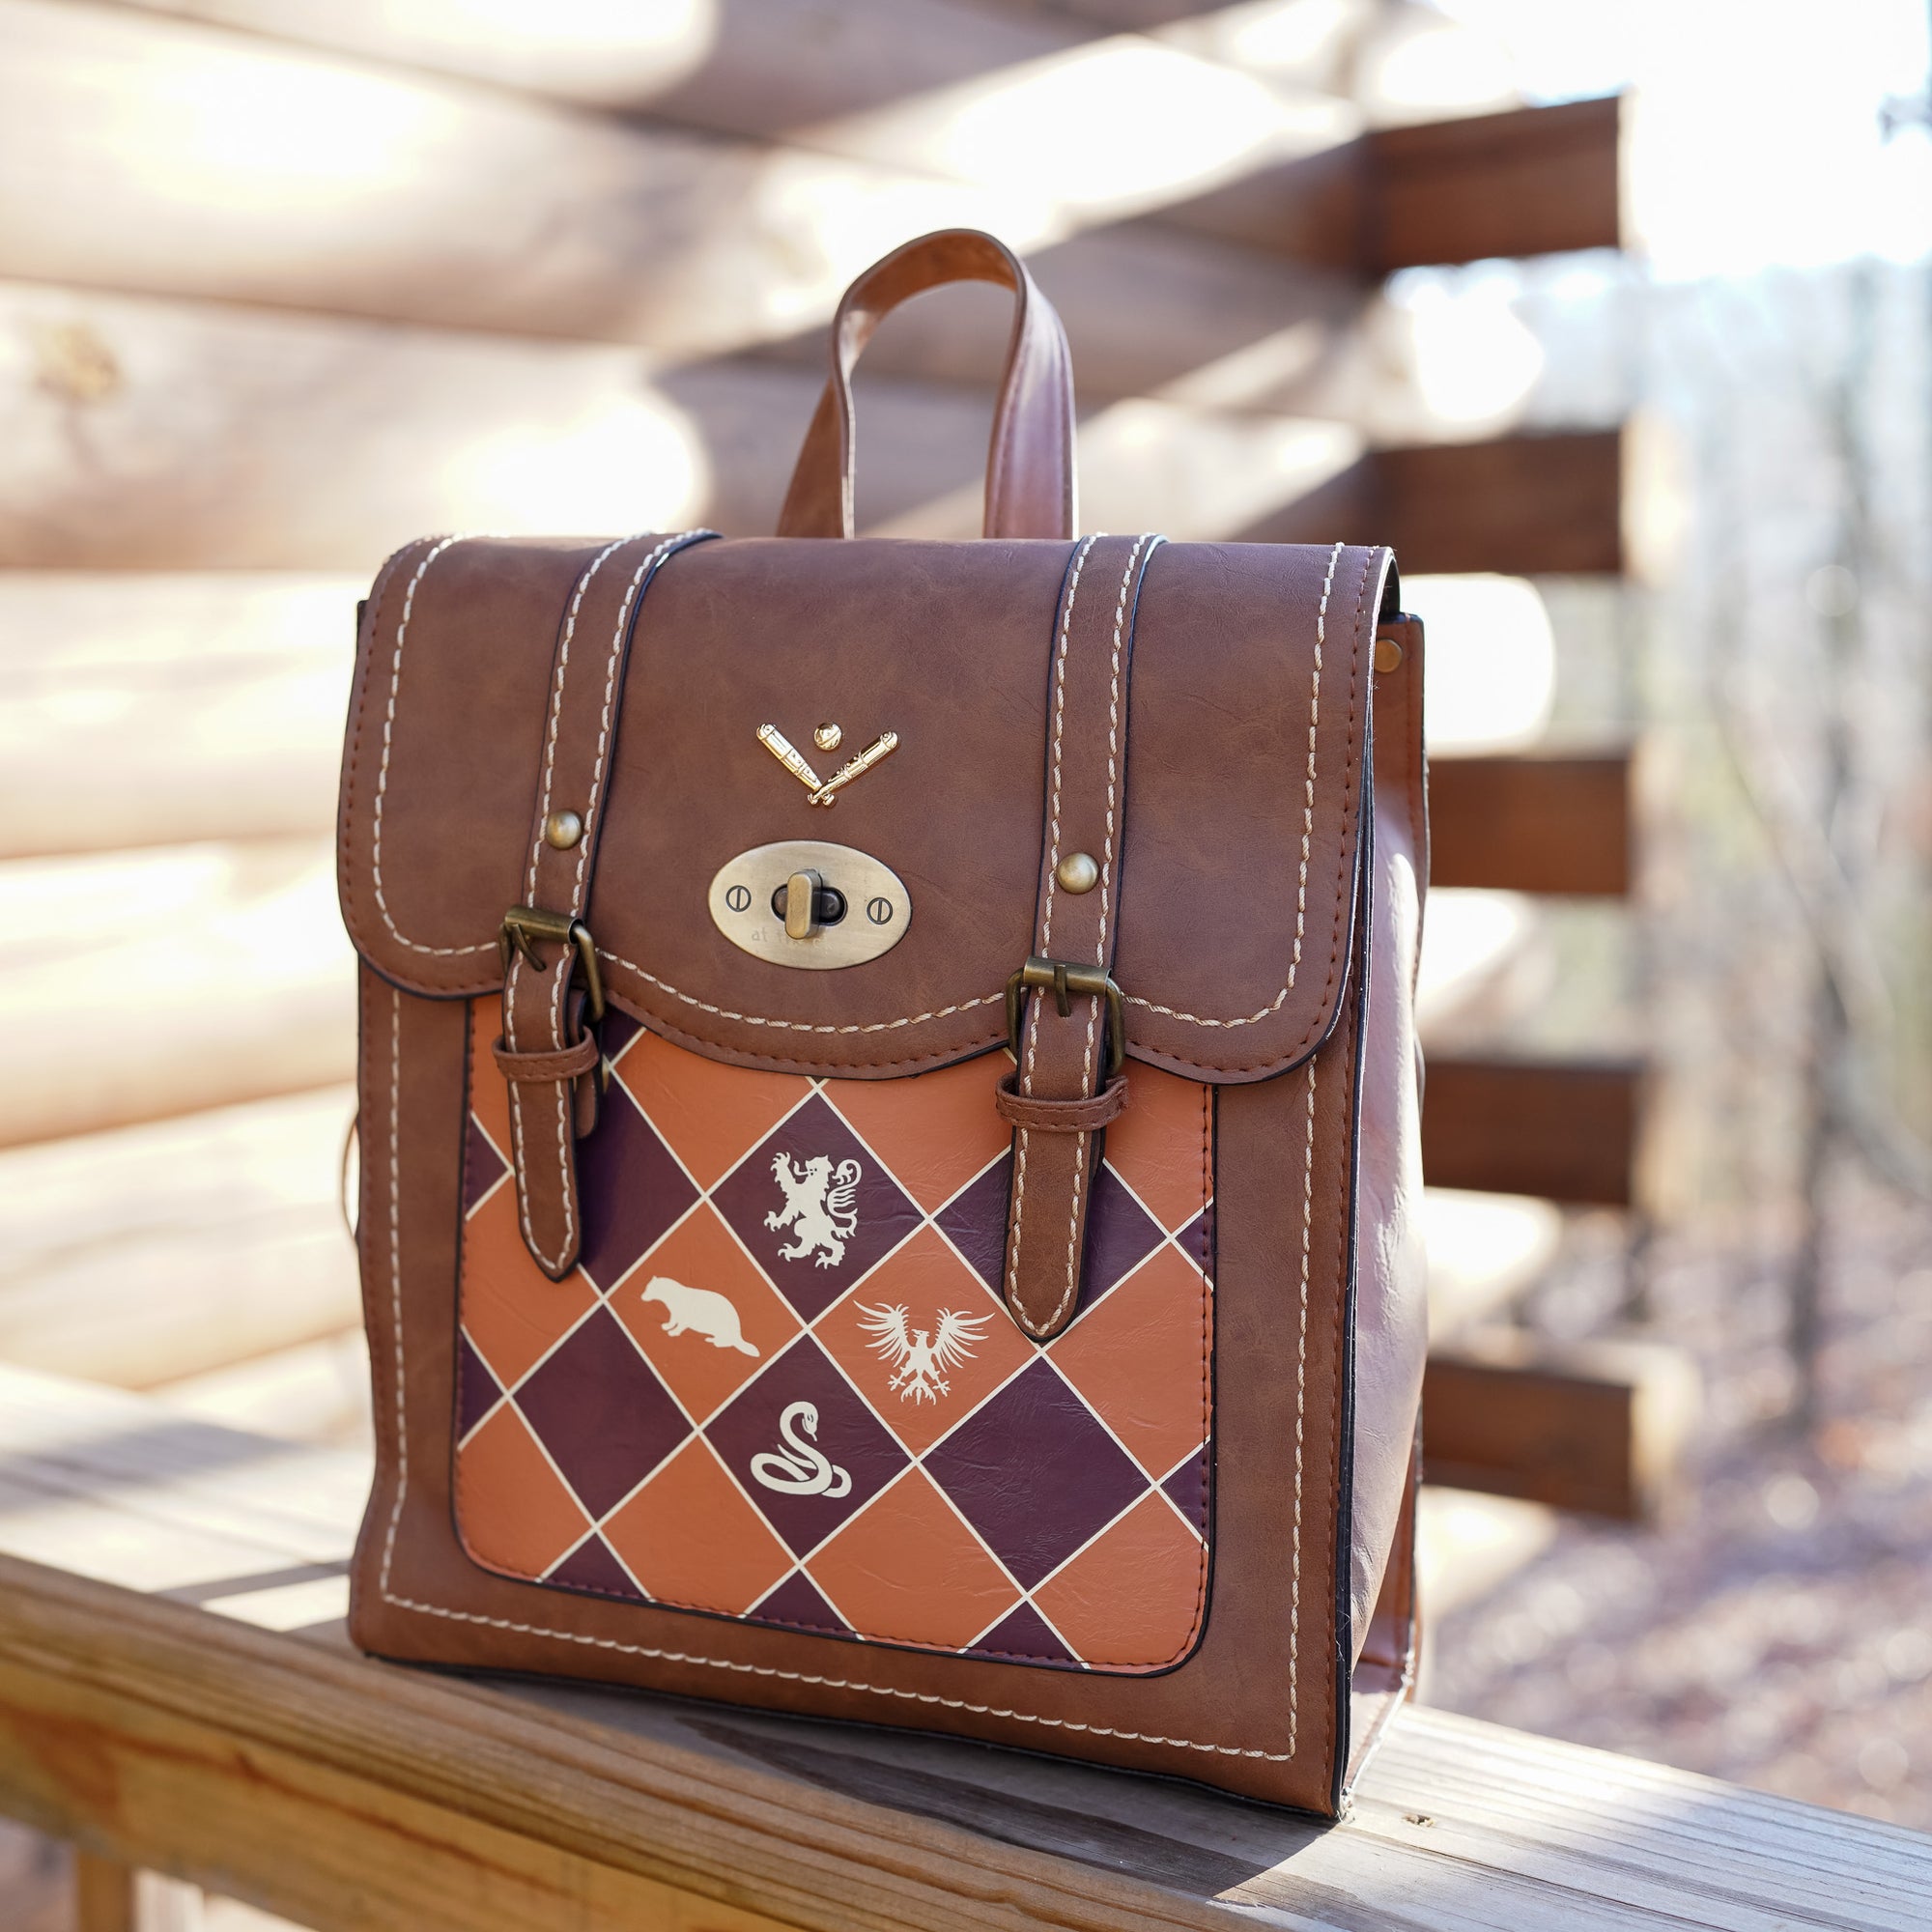 Magical Sports Backpack is made of brown leather, orange and maroon checkers and gold details